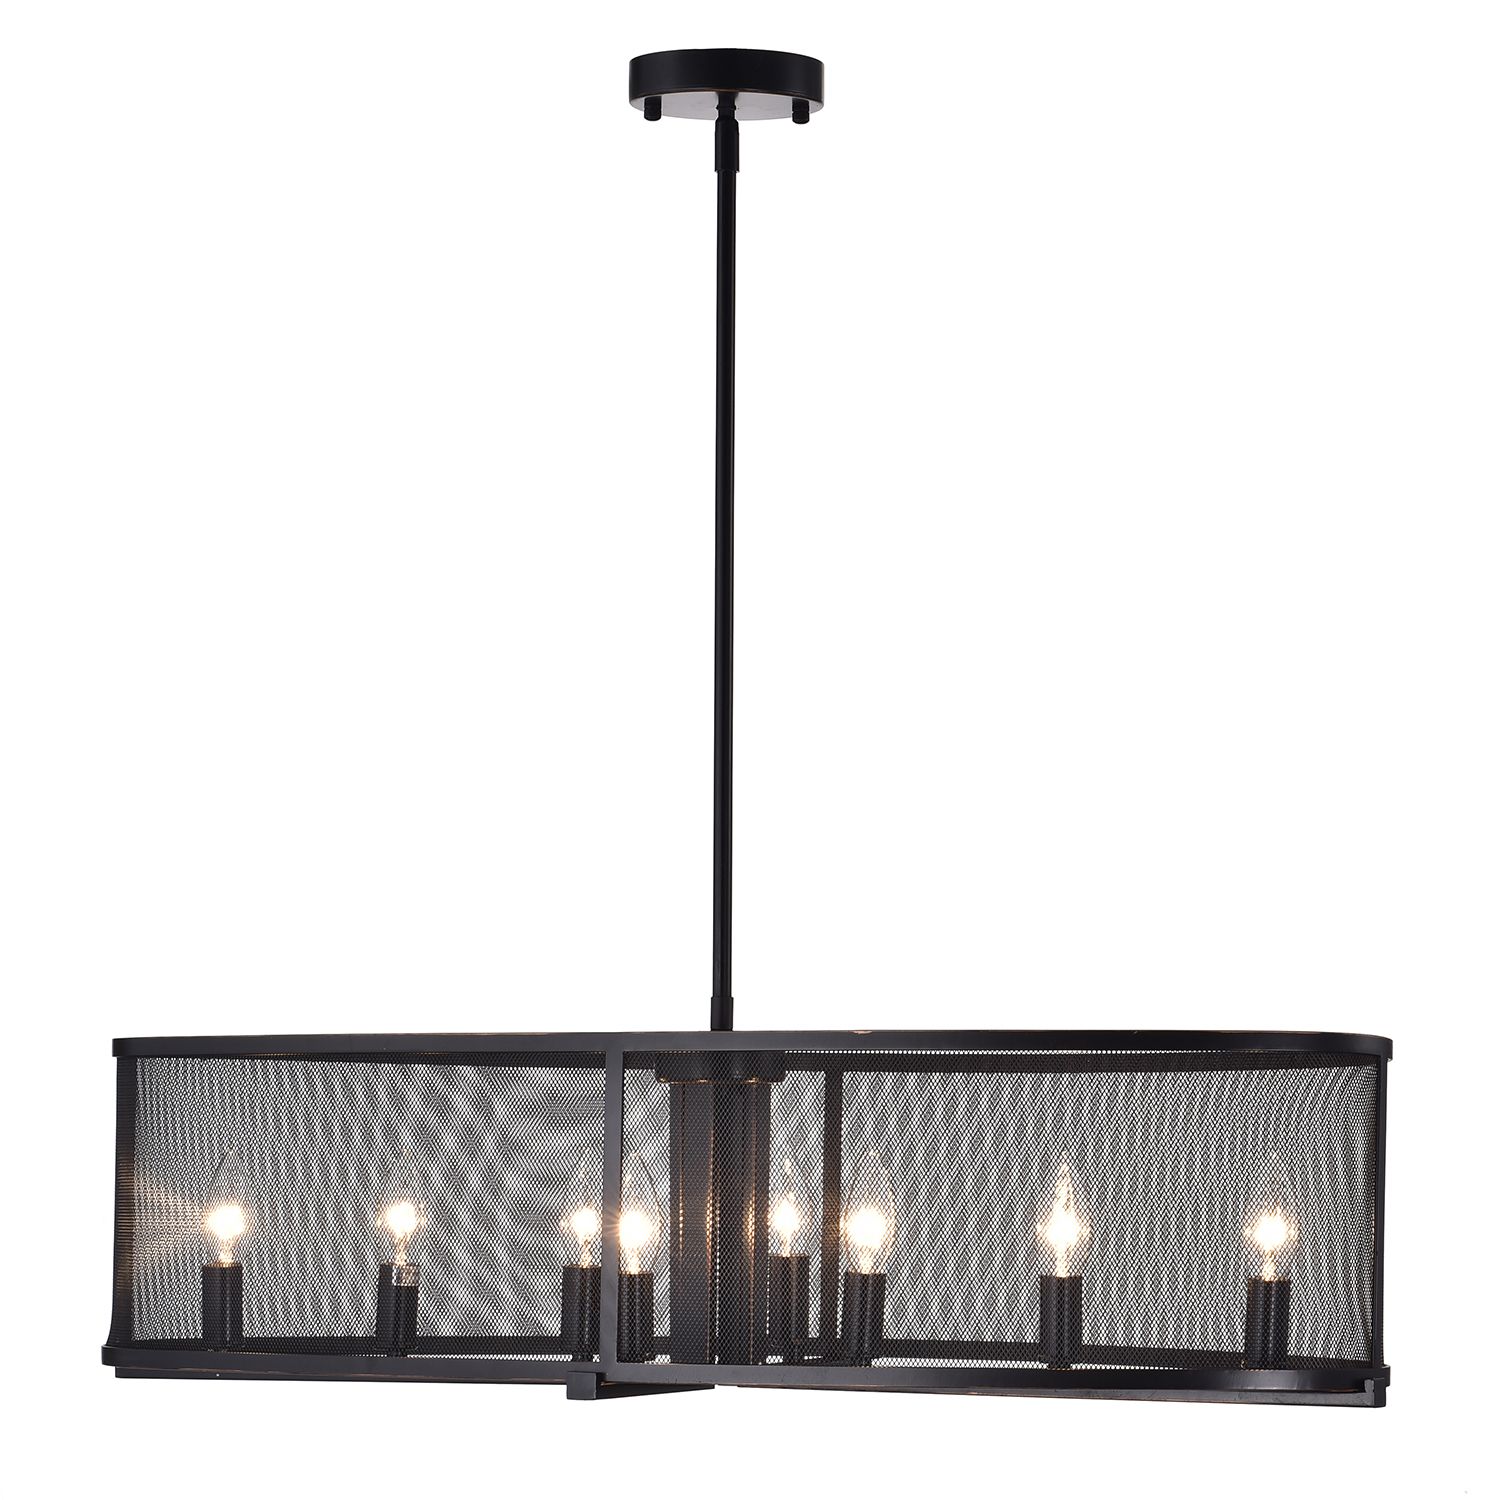 Aludra 8 Light Oil Rubbed Bronze Oval Metal Mesh Shade With Bronze Oval Chandeliers (View 3 of 15)